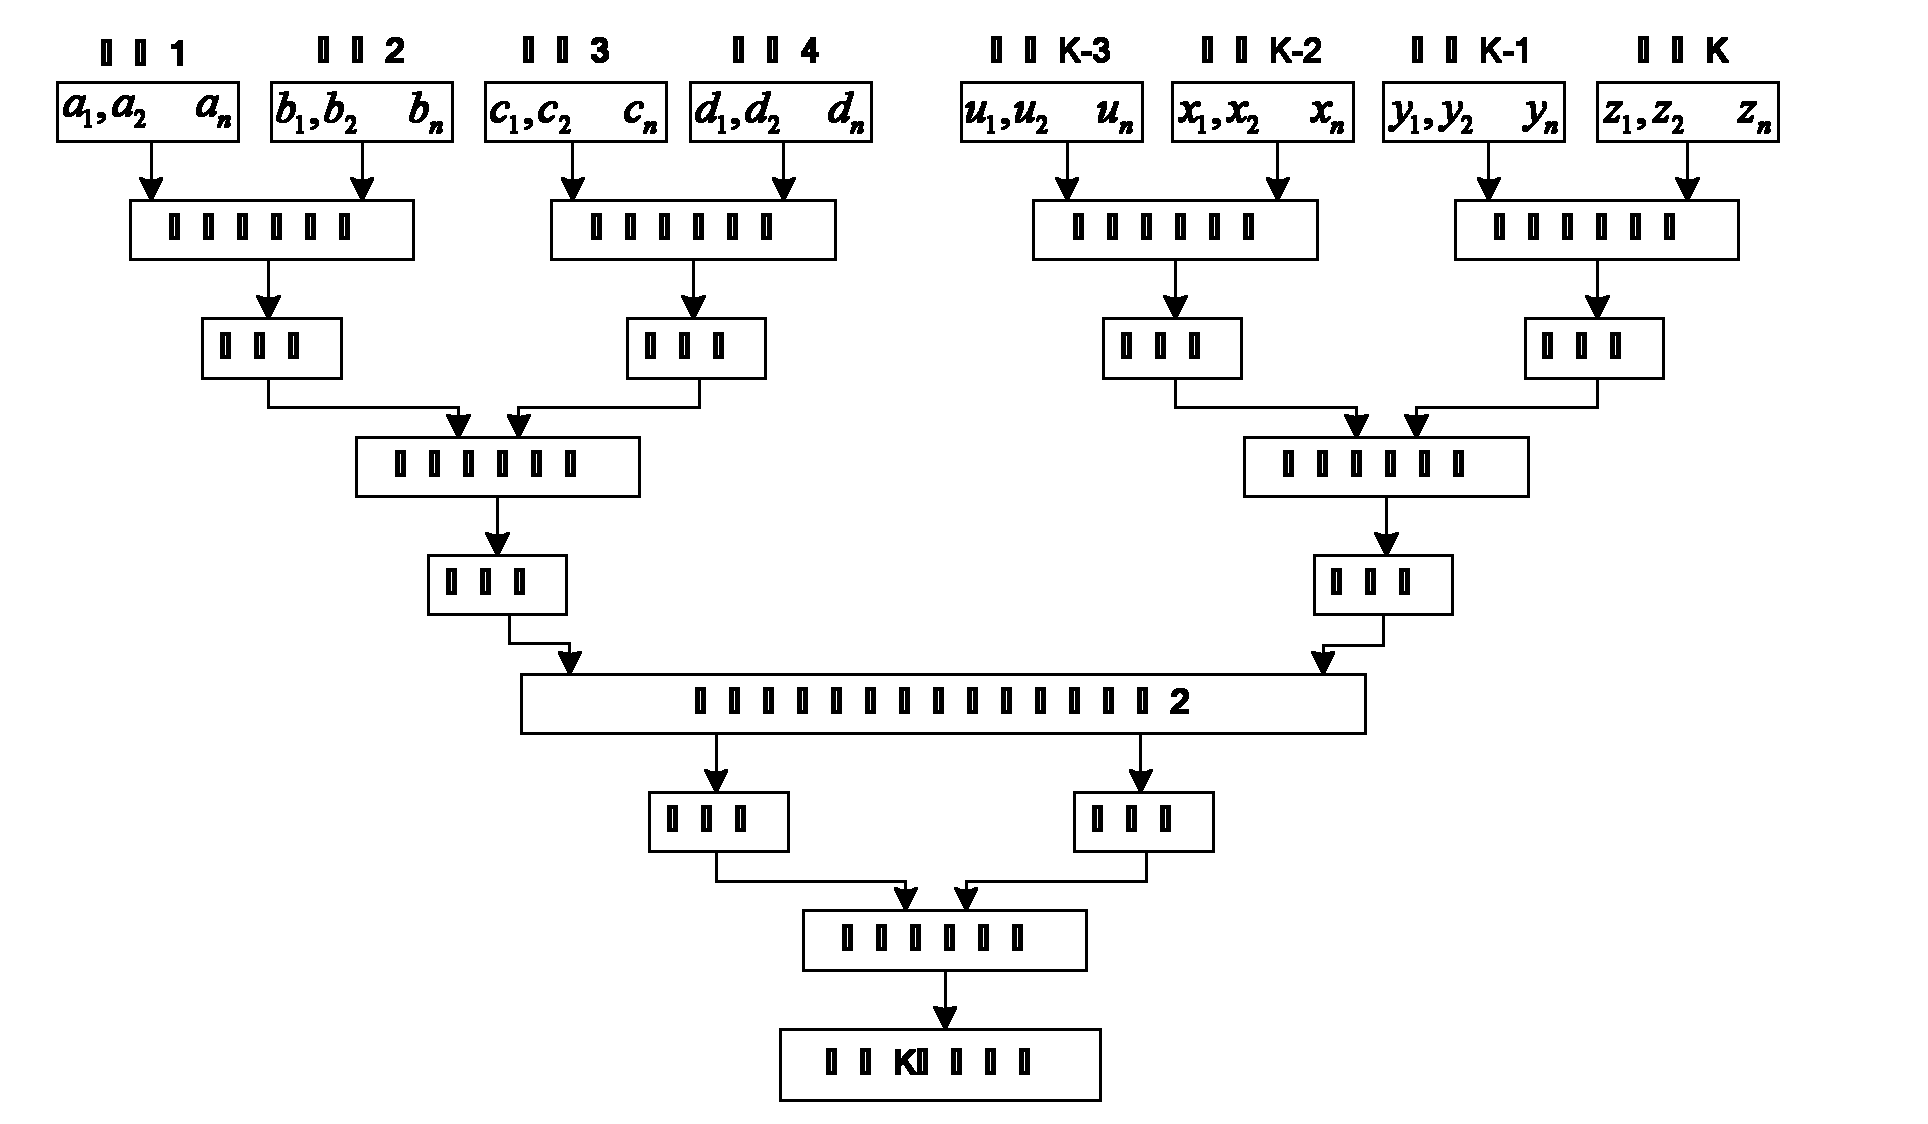 Multiple-input multiple-output (MIMO) signal detection method based on breadth-first tree search